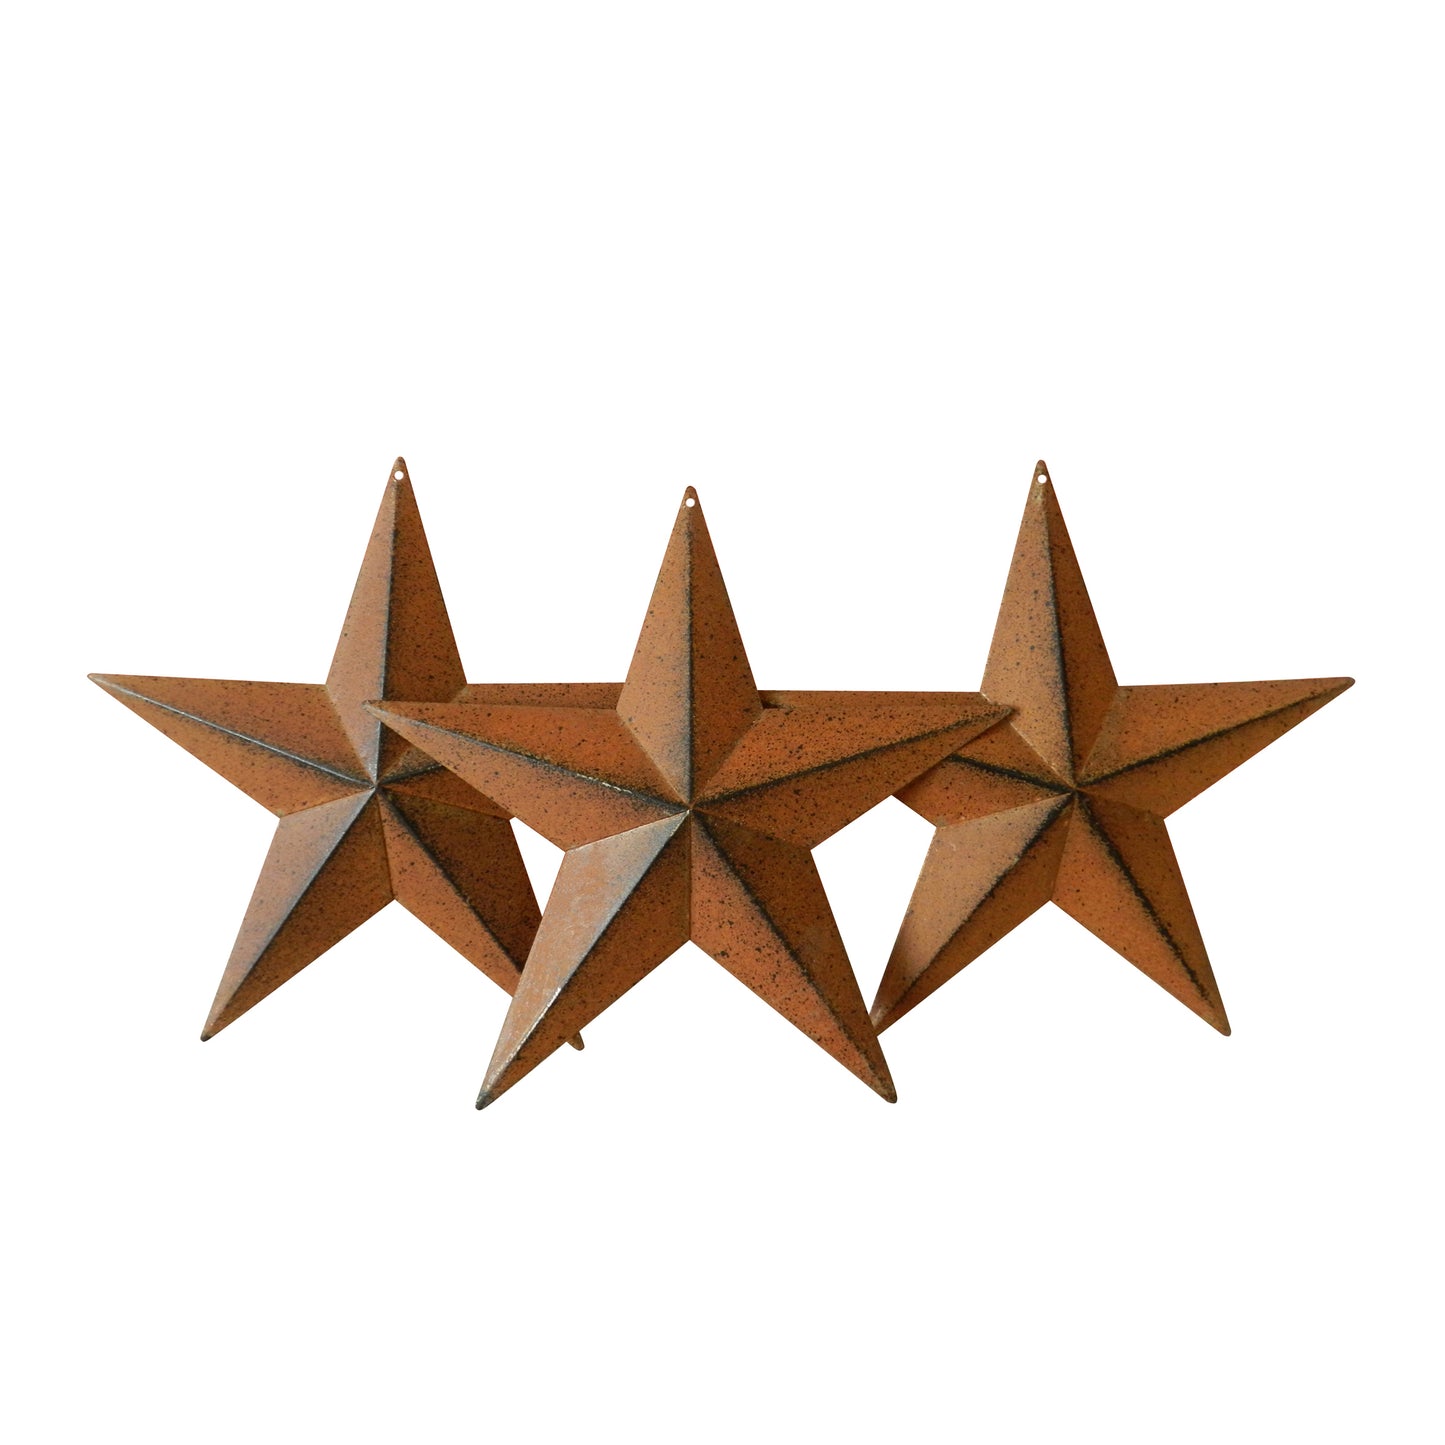 CVHOMEDECO. Country Rustic Antique Vintage Gifts Rusty/Black Metal Barn Star Wall/Door Decor, 8 Inch, Set of 3.